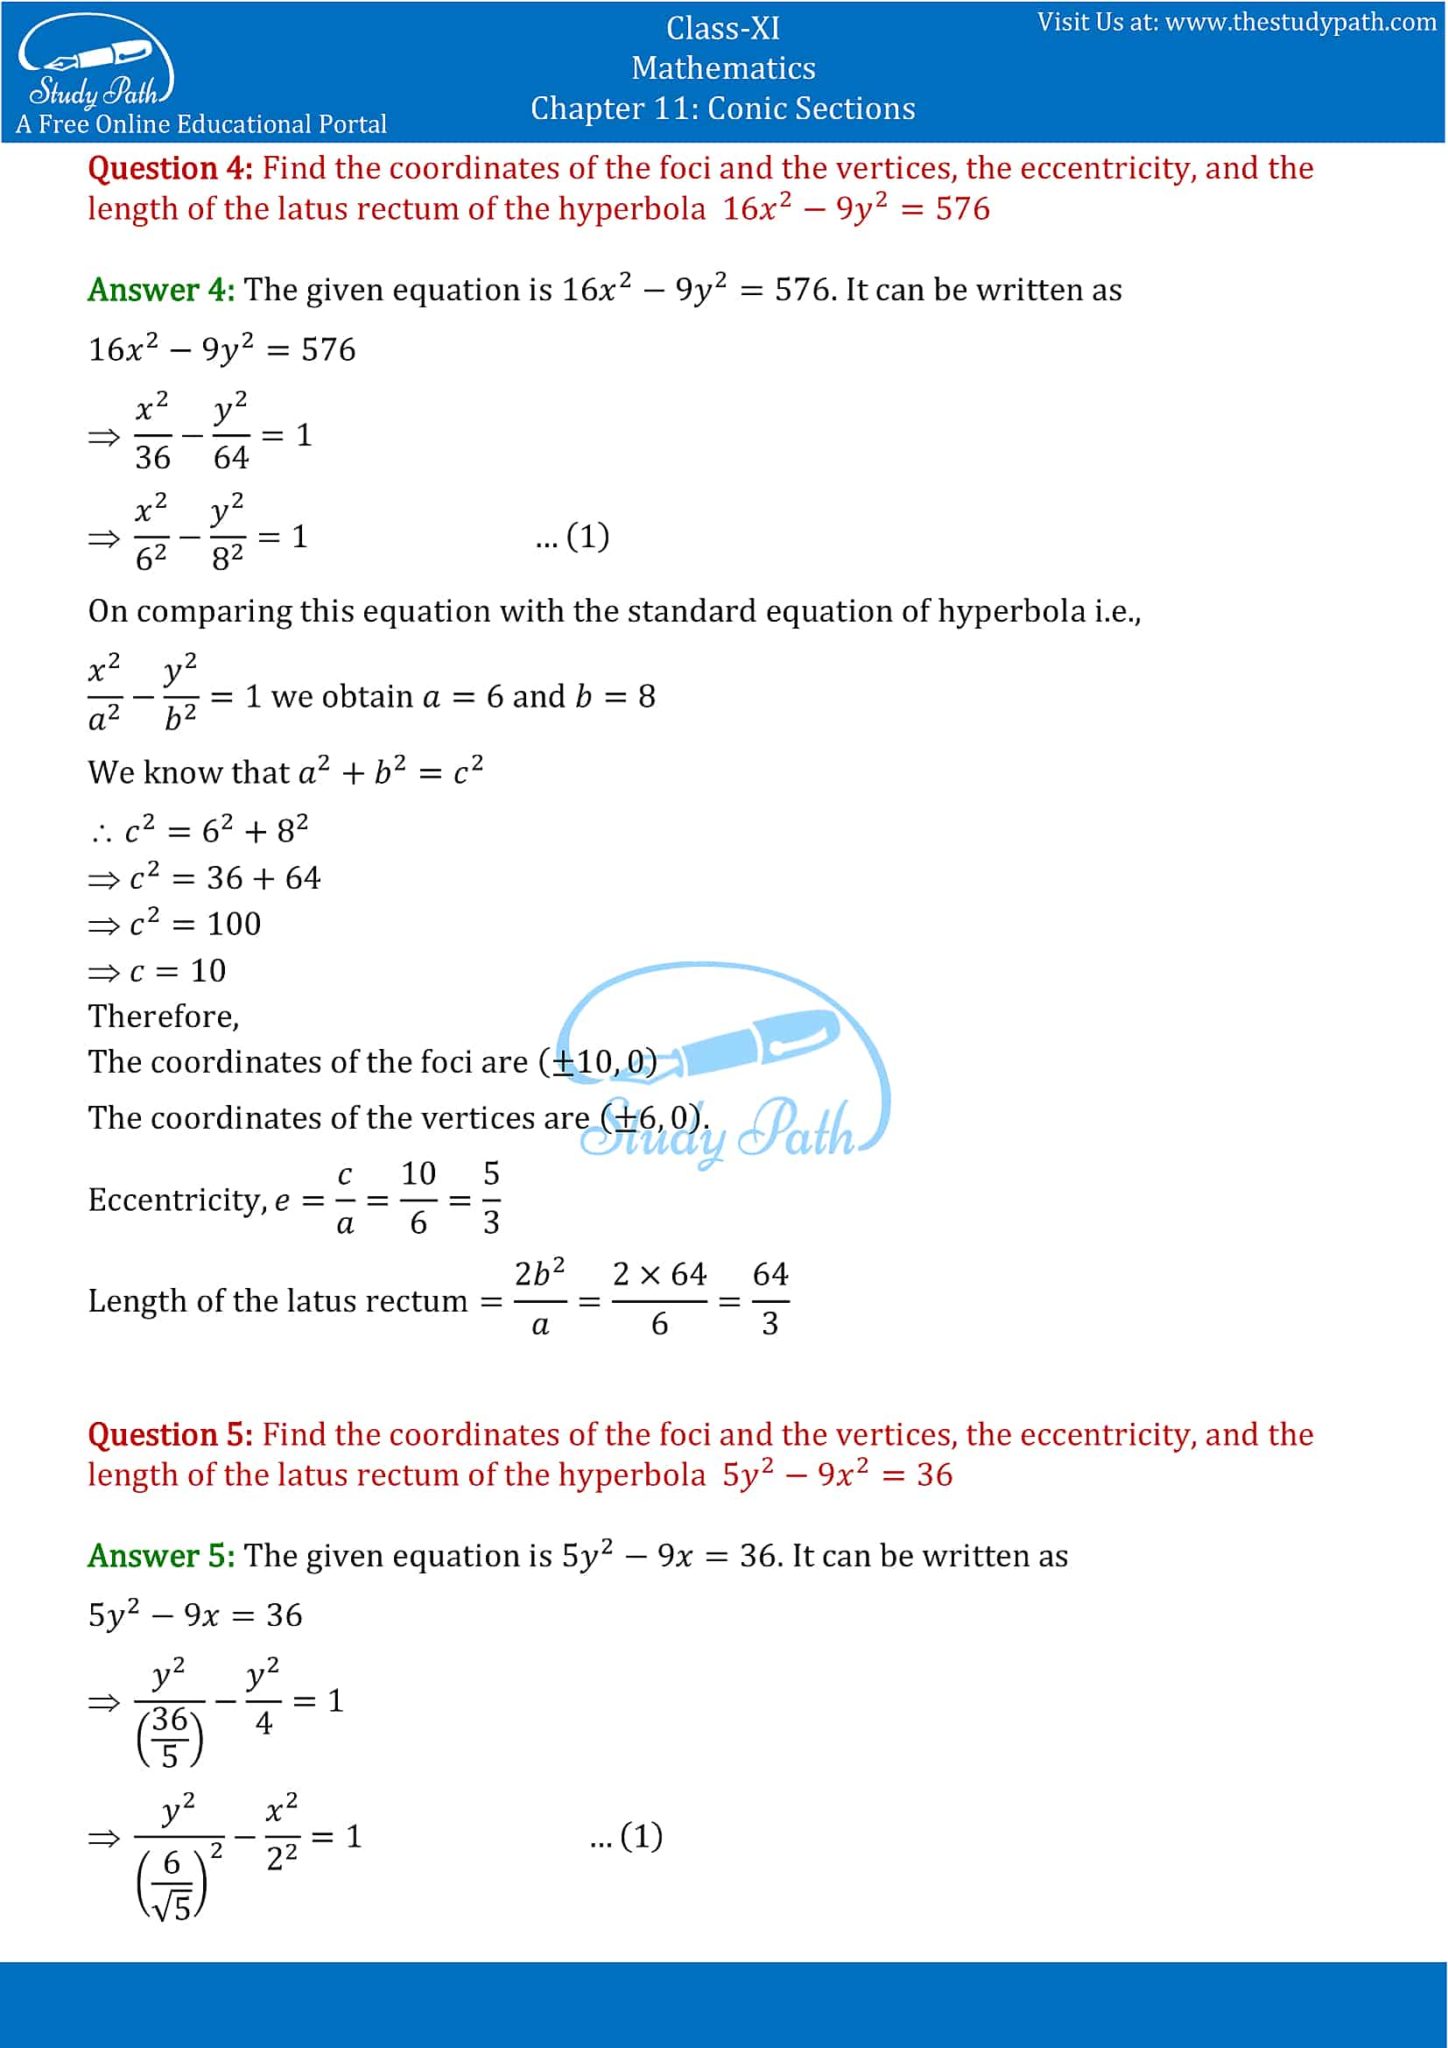 NCERT Solutions Class 11 Maths Chapter 11 Exercise 11 4 Study Path